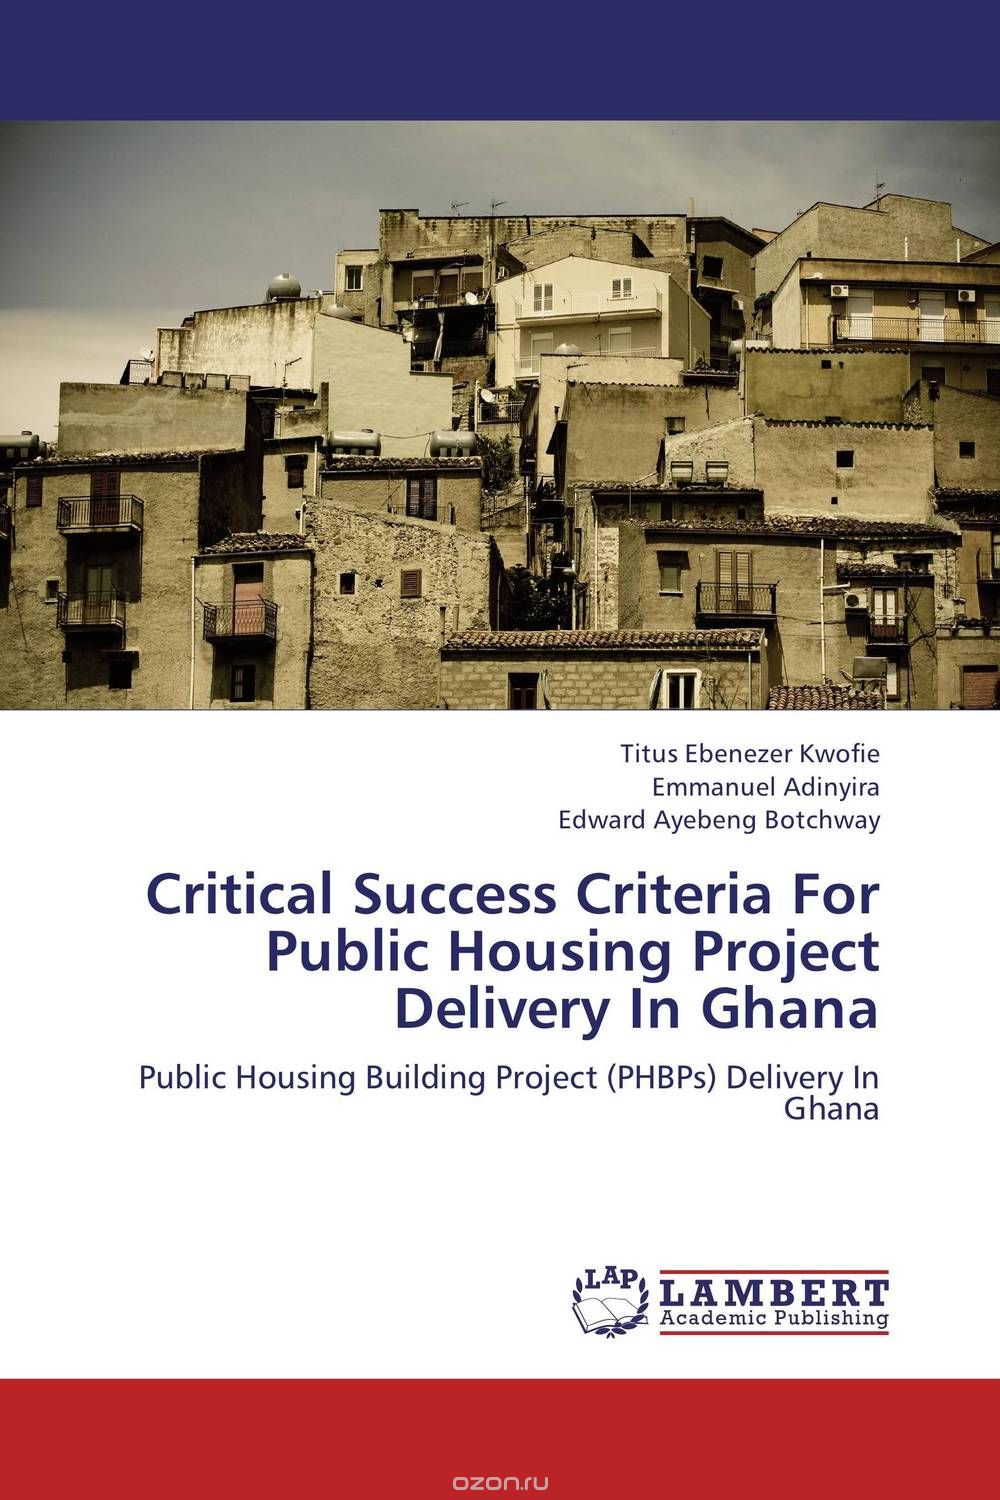 Скачать книгу "Critical Success Criteria For Public Housing Project Delivery In Ghana"